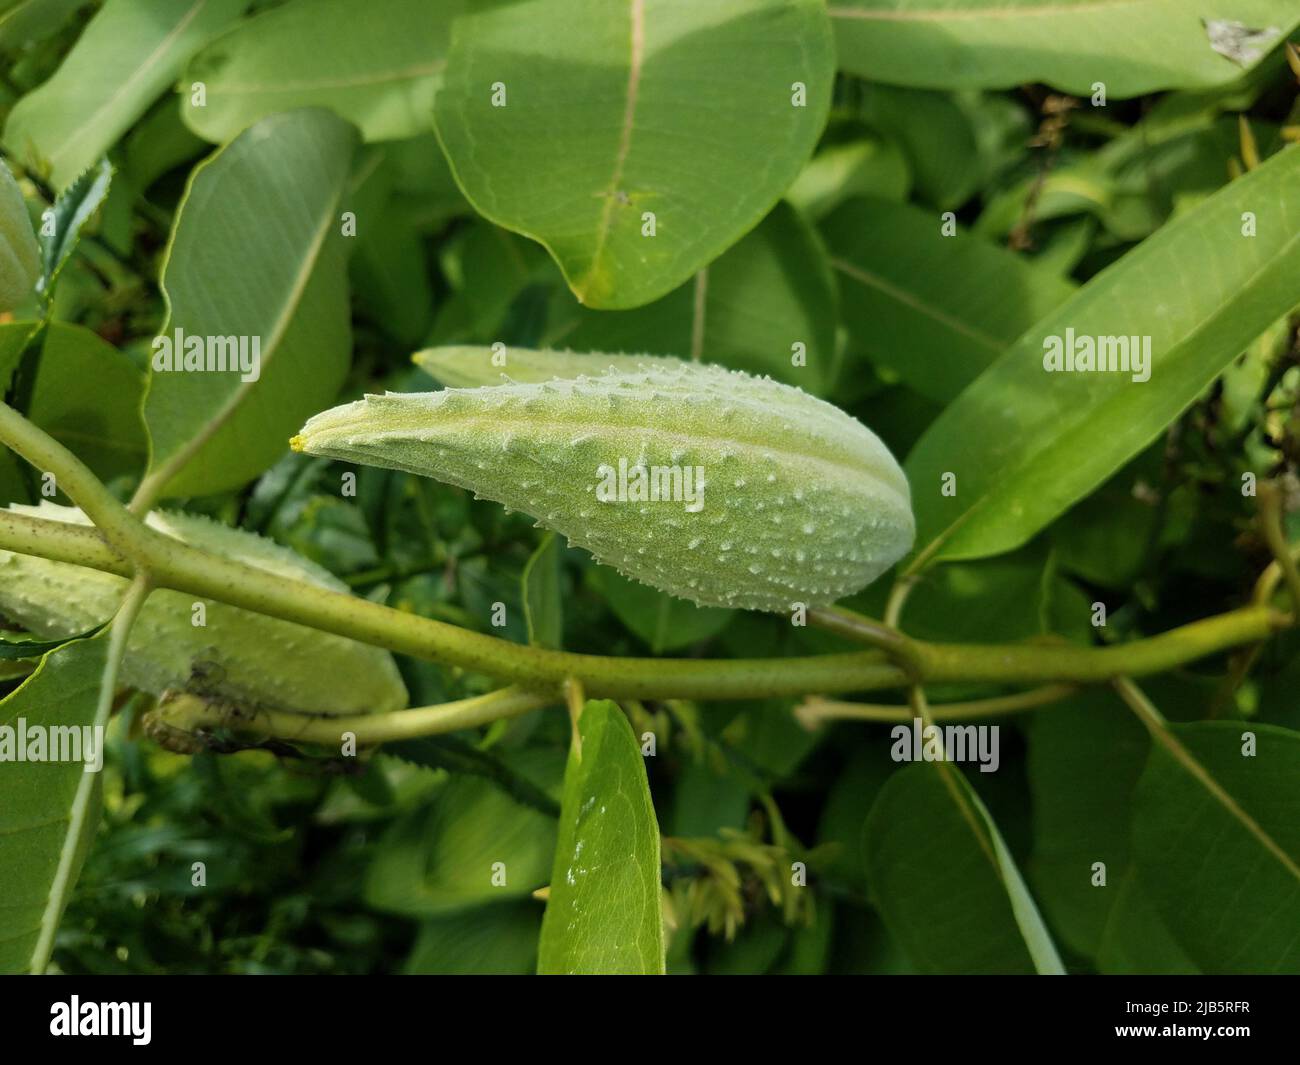 green plant with leaves and bumpy flower pod. Stock Photo